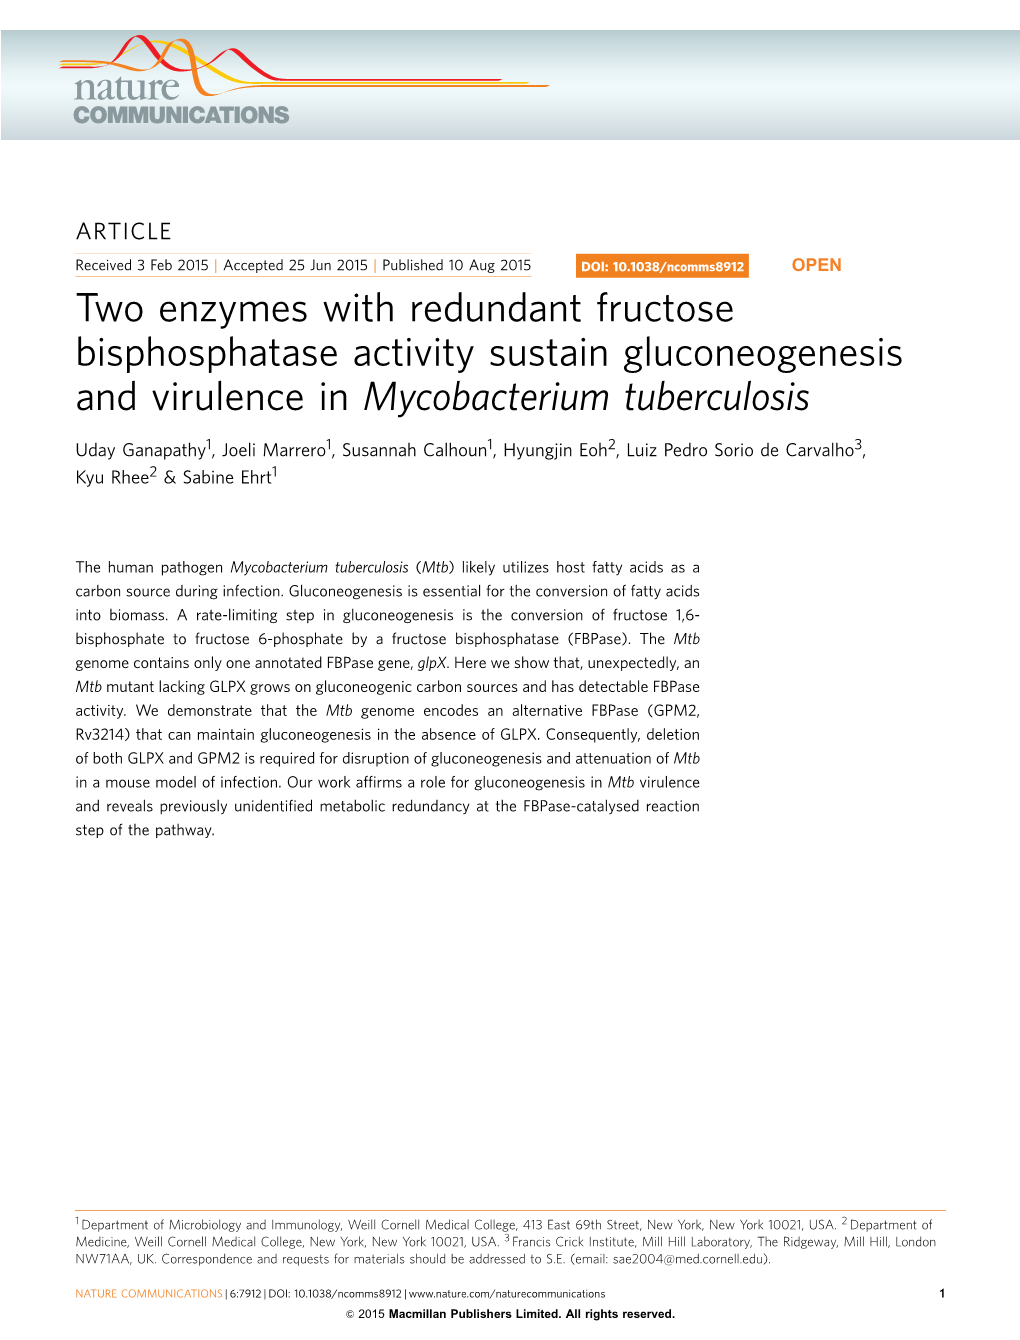 Two Enzymes with Redundant Fructose Bisphosphatase Activity Sustain Gluconeogenesis and Virulence in Mycobacterium Tuberculosis